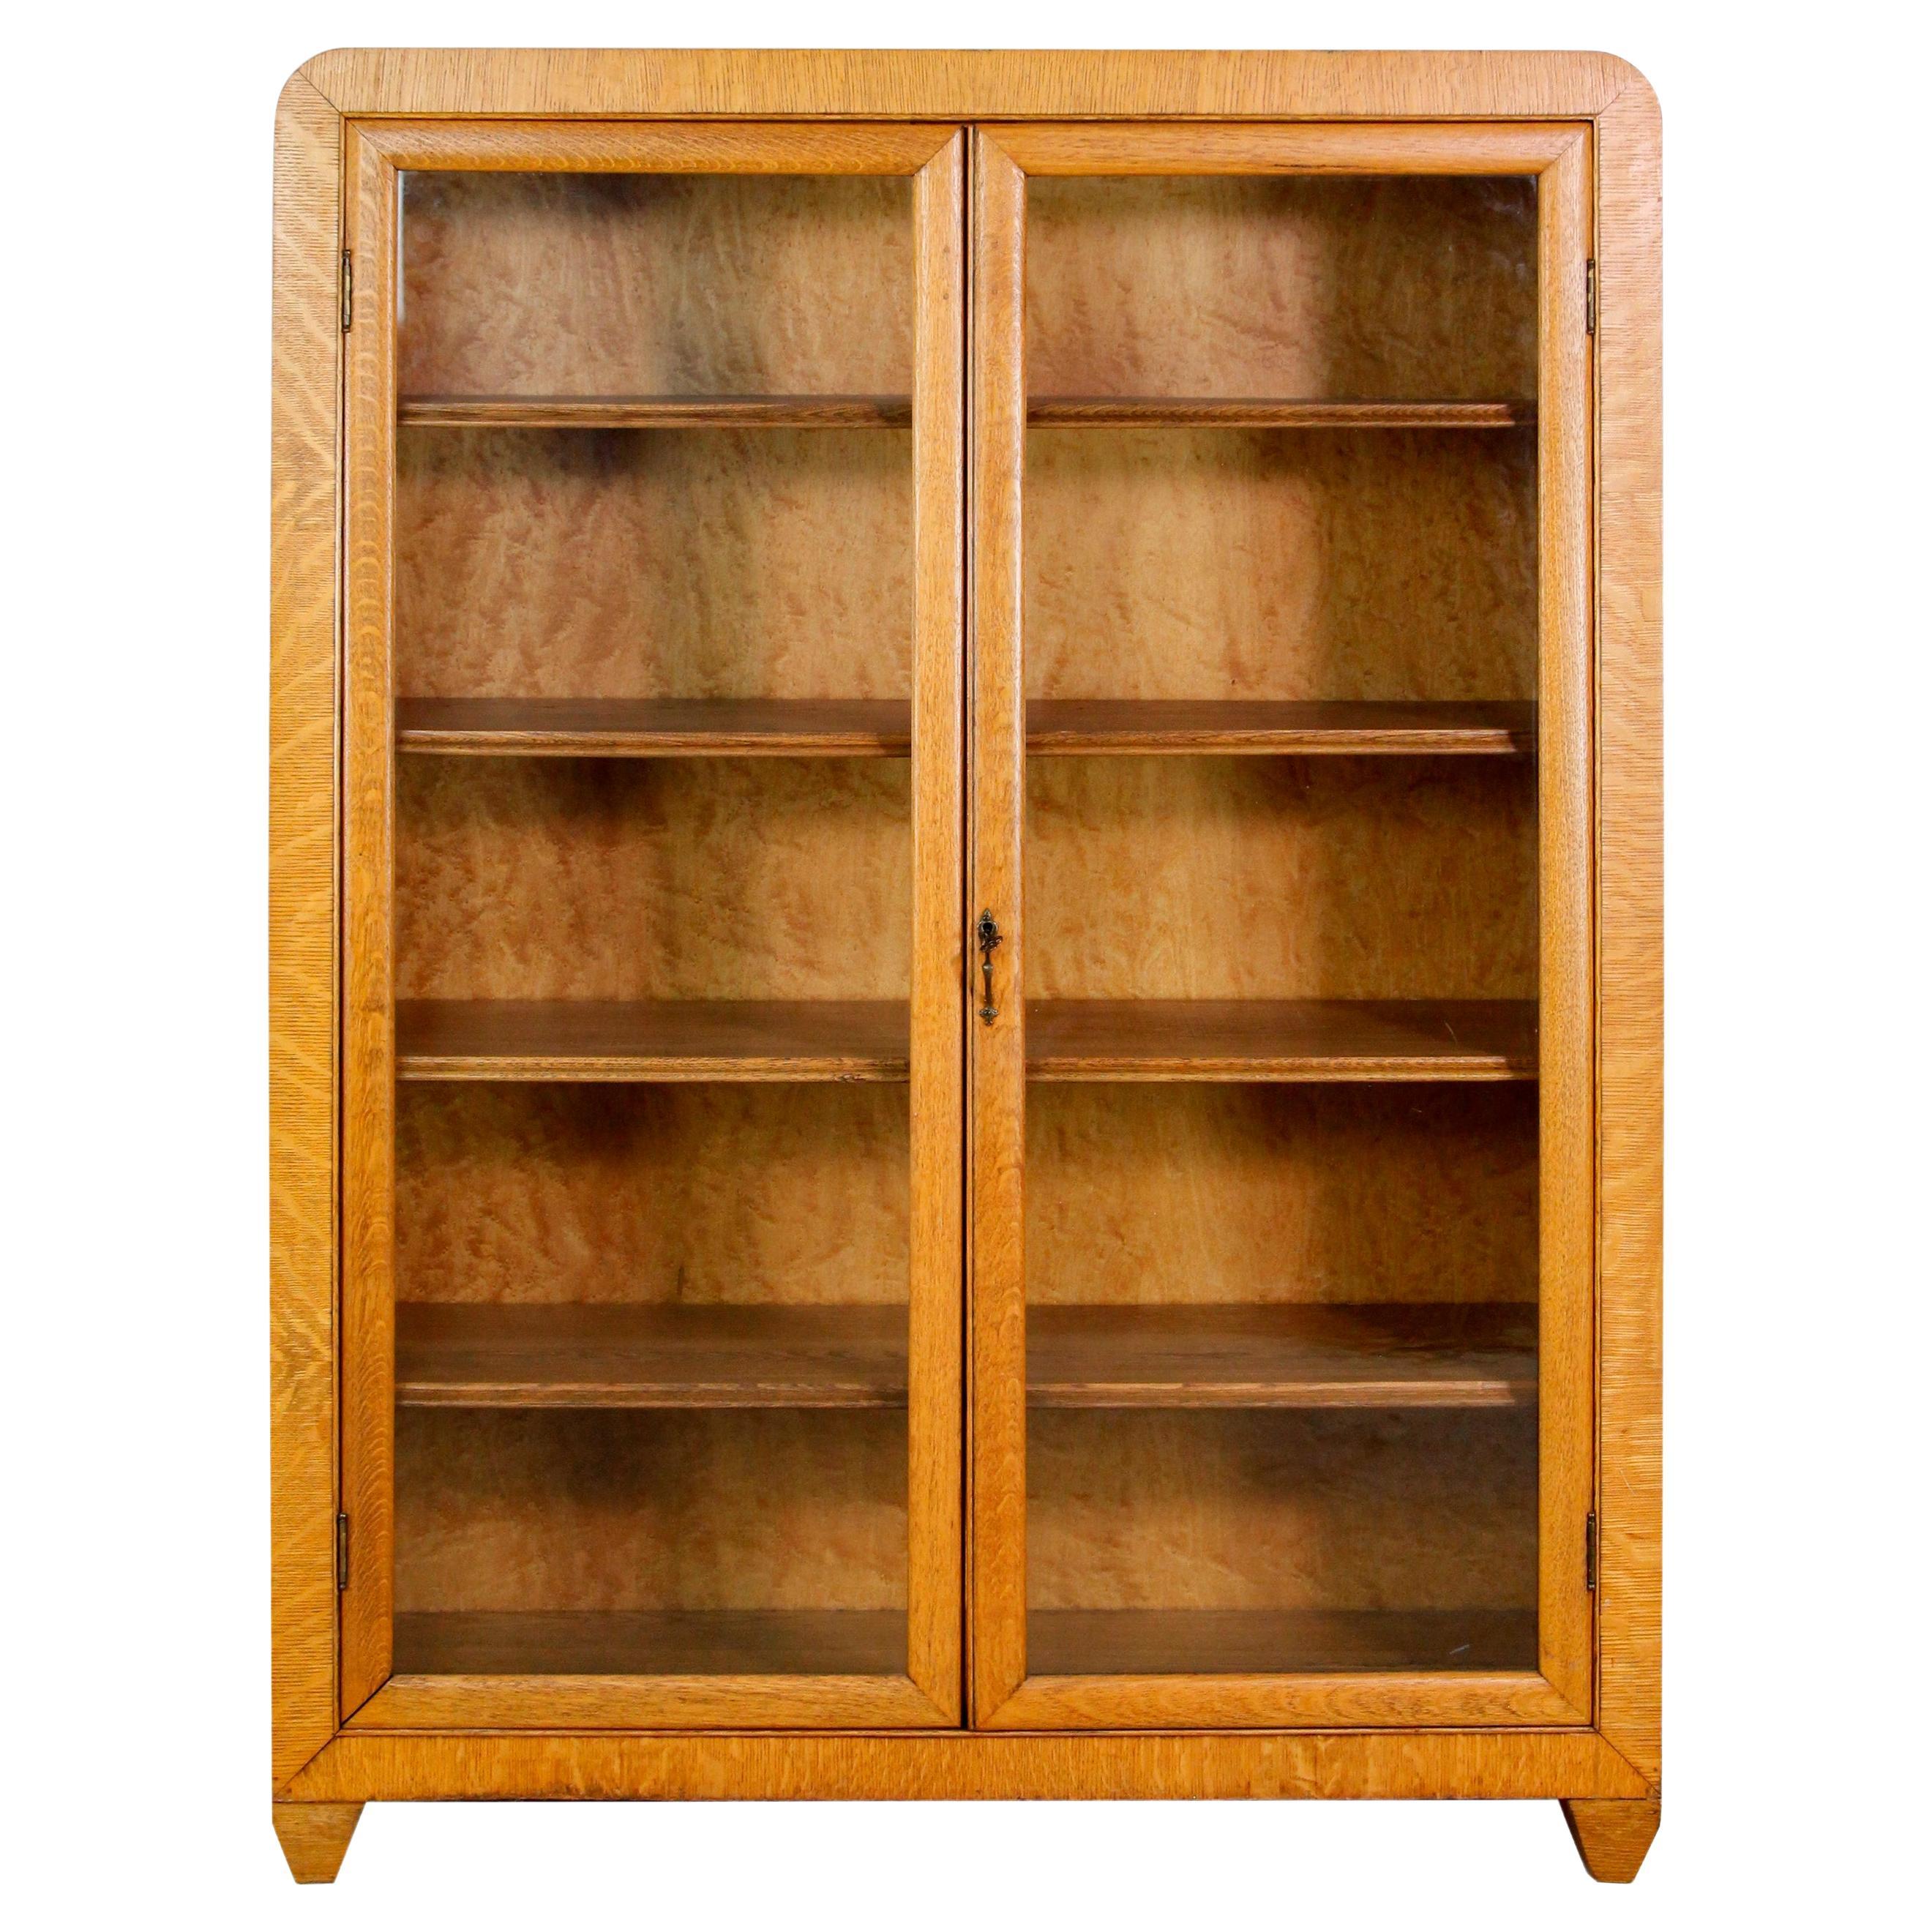 1940s Tiger Oak Bookcase Cabinet w. 4 Shelves and Double Glass Doors